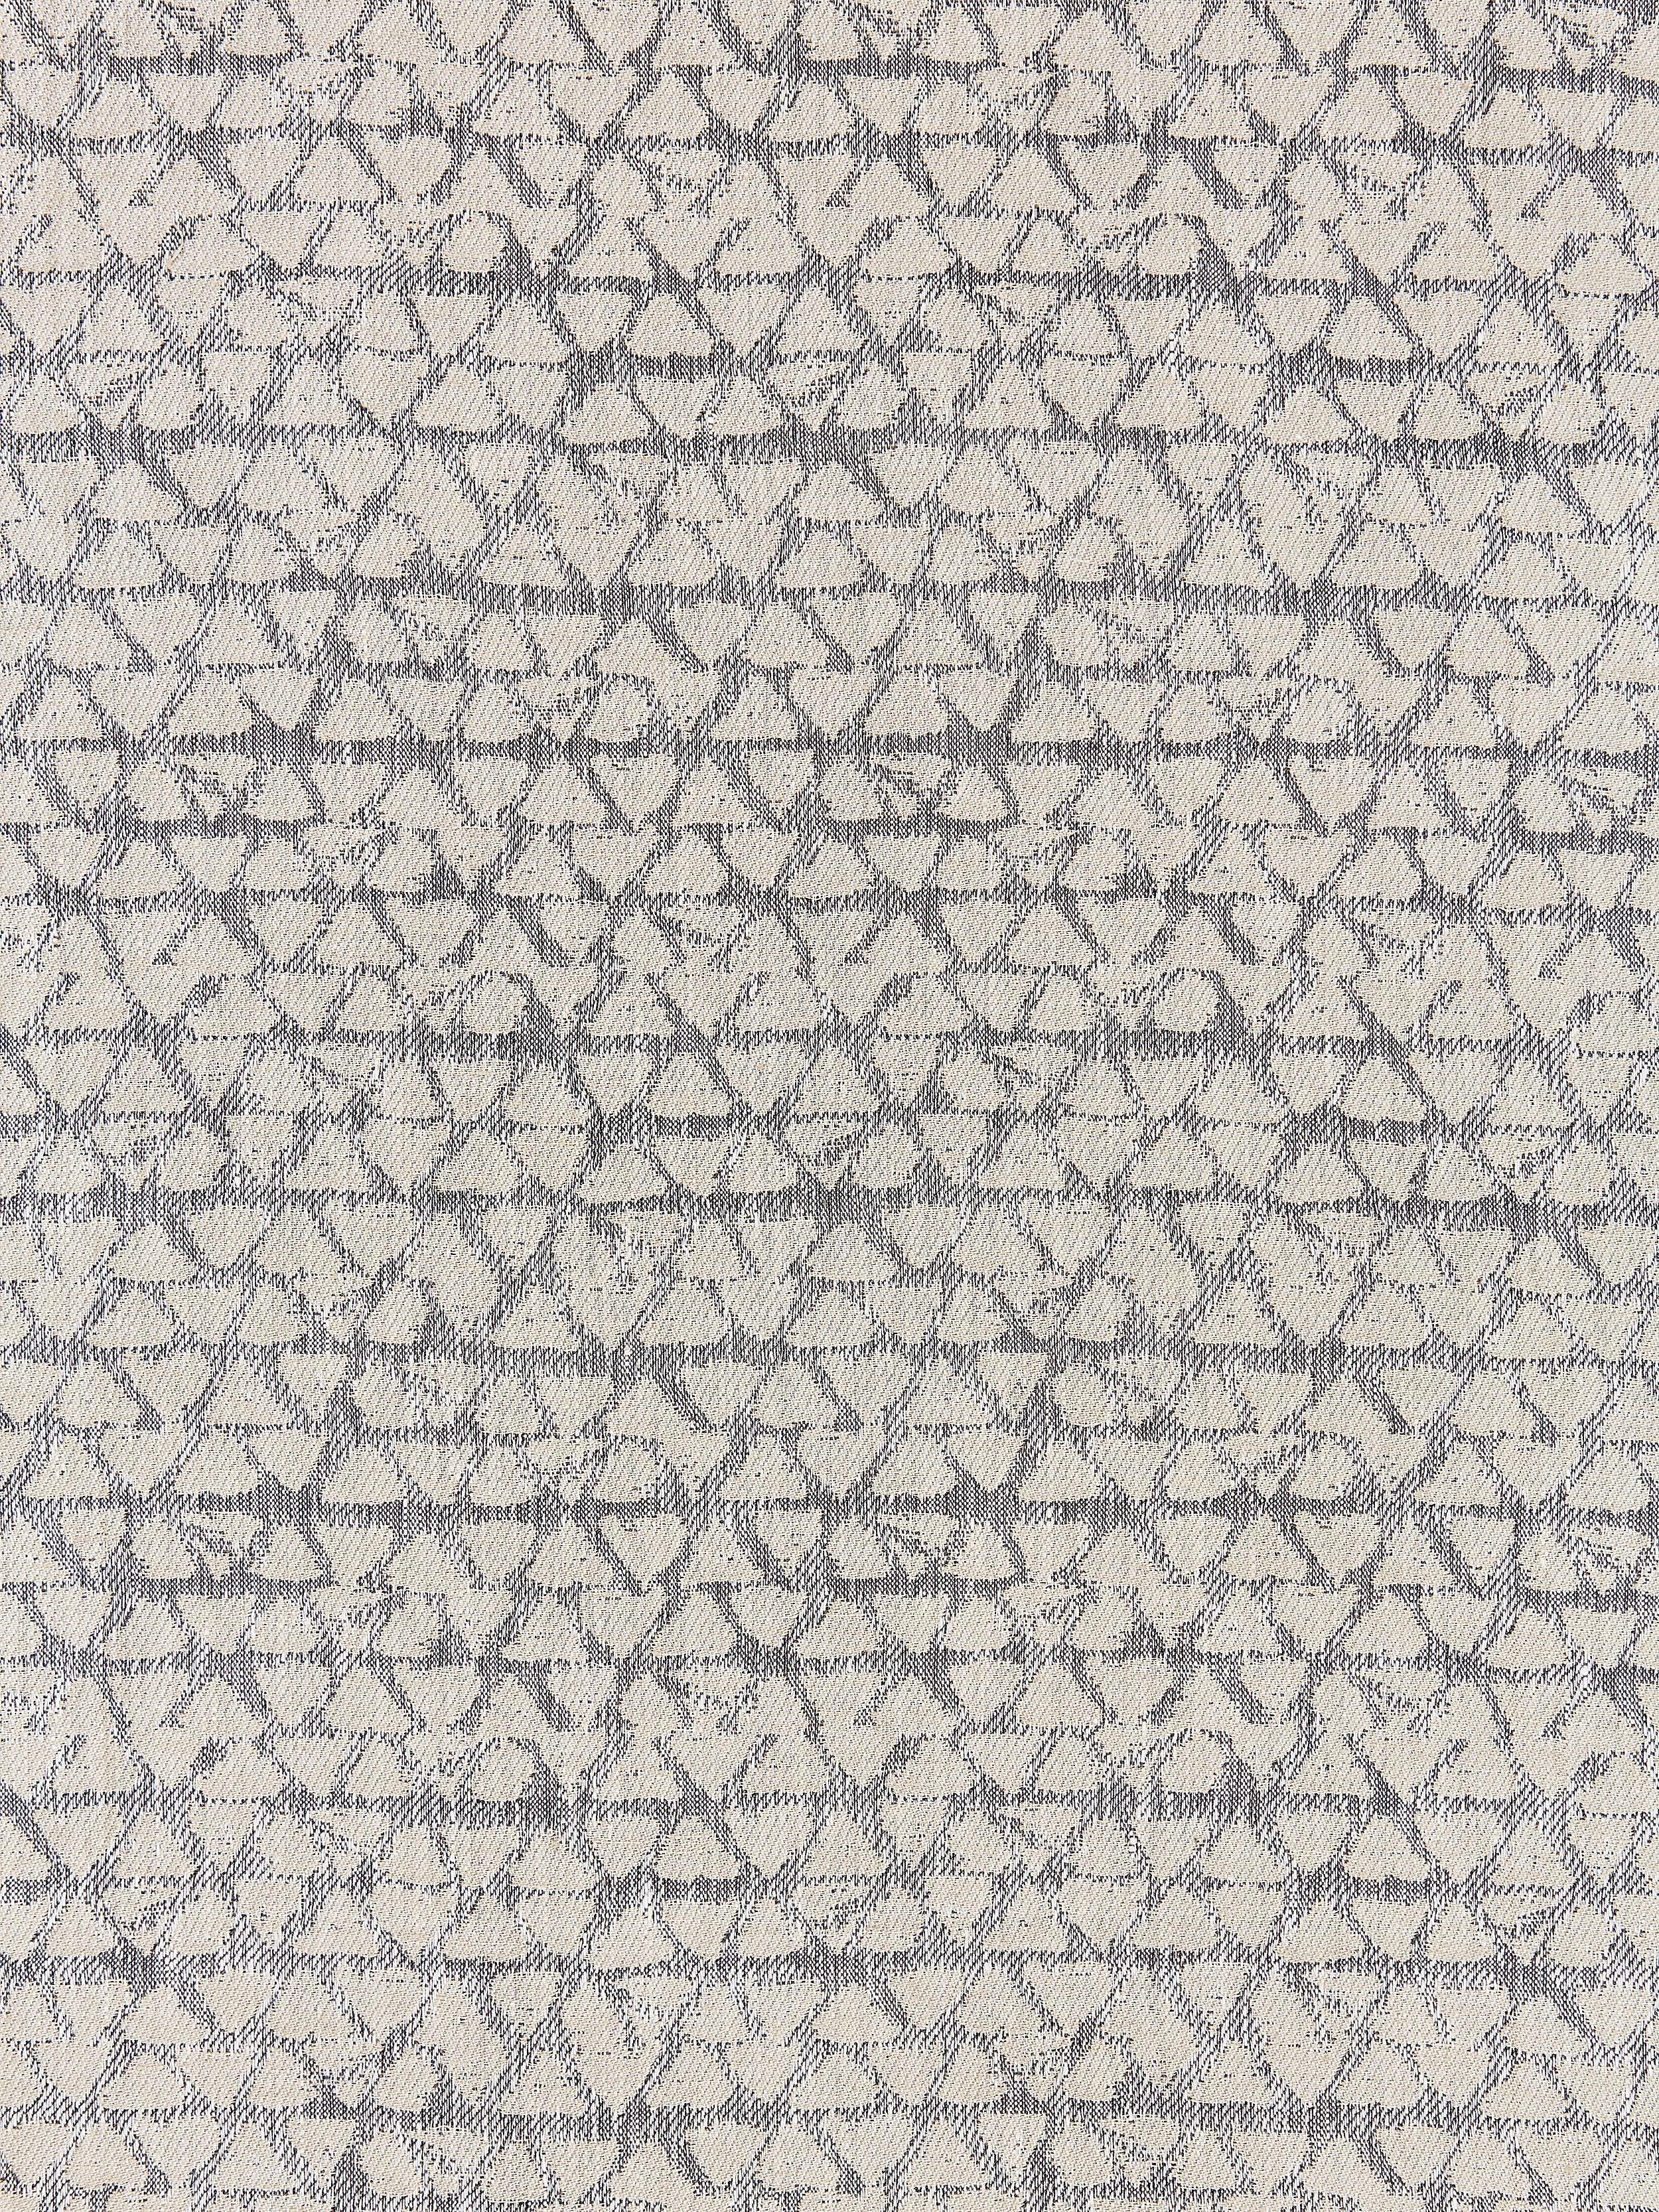 Kanoko fabric in smoke color - pattern number SC 000327148 - by Scalamandre in the Scalamandre Fabrics Book 1 collection